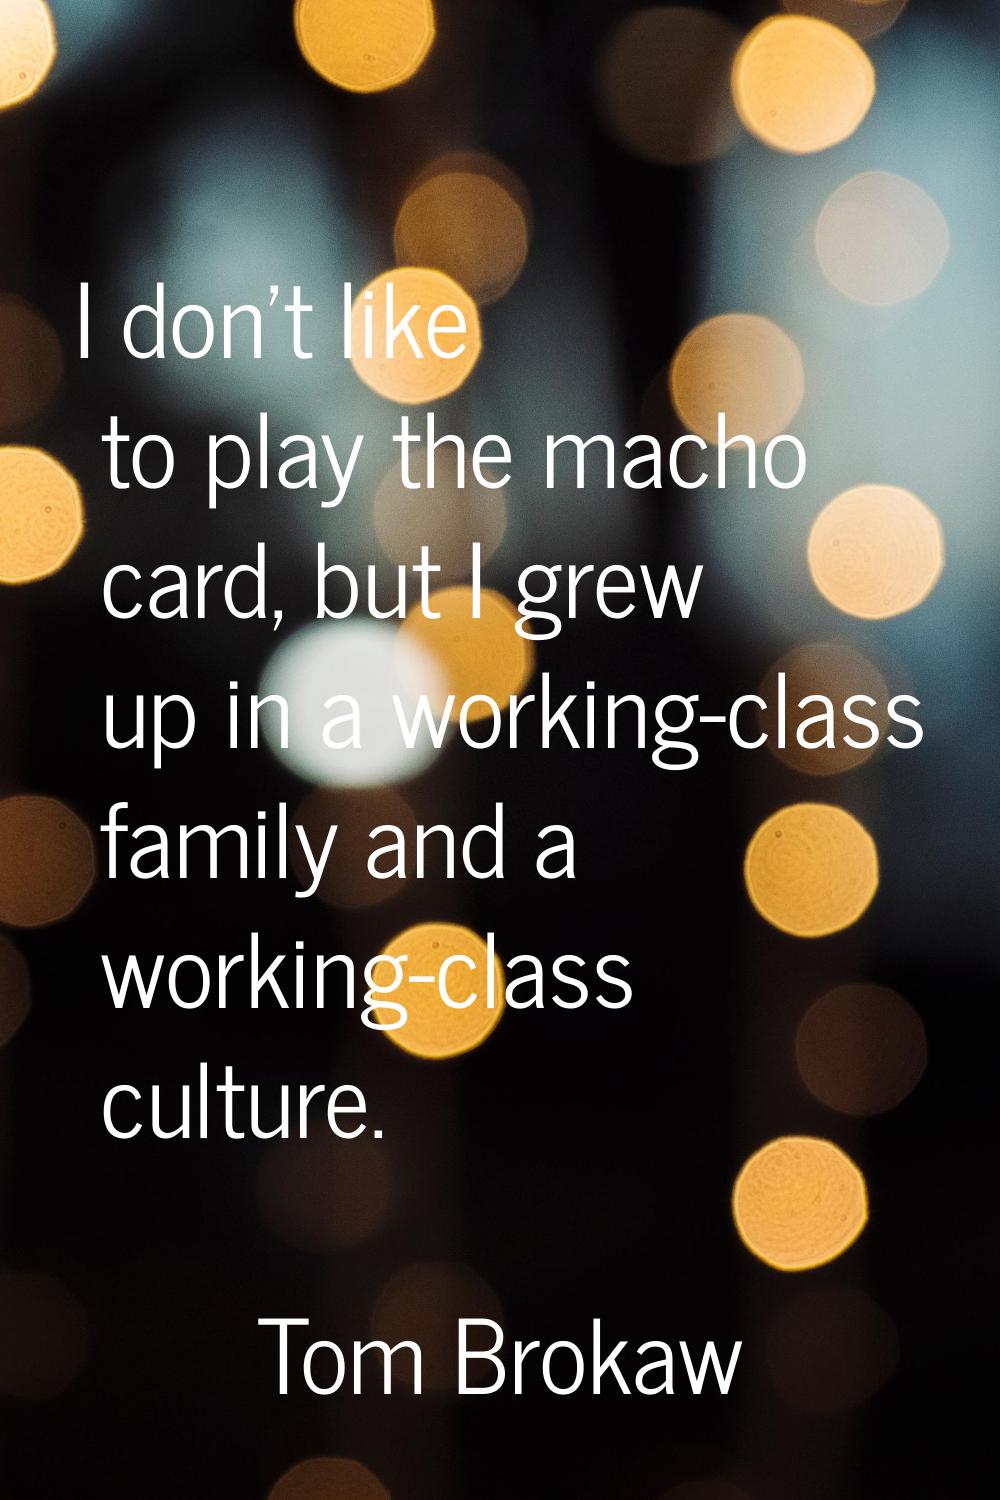 I don't like to play the macho card, but I grew up in a working-class family and a working-class cu